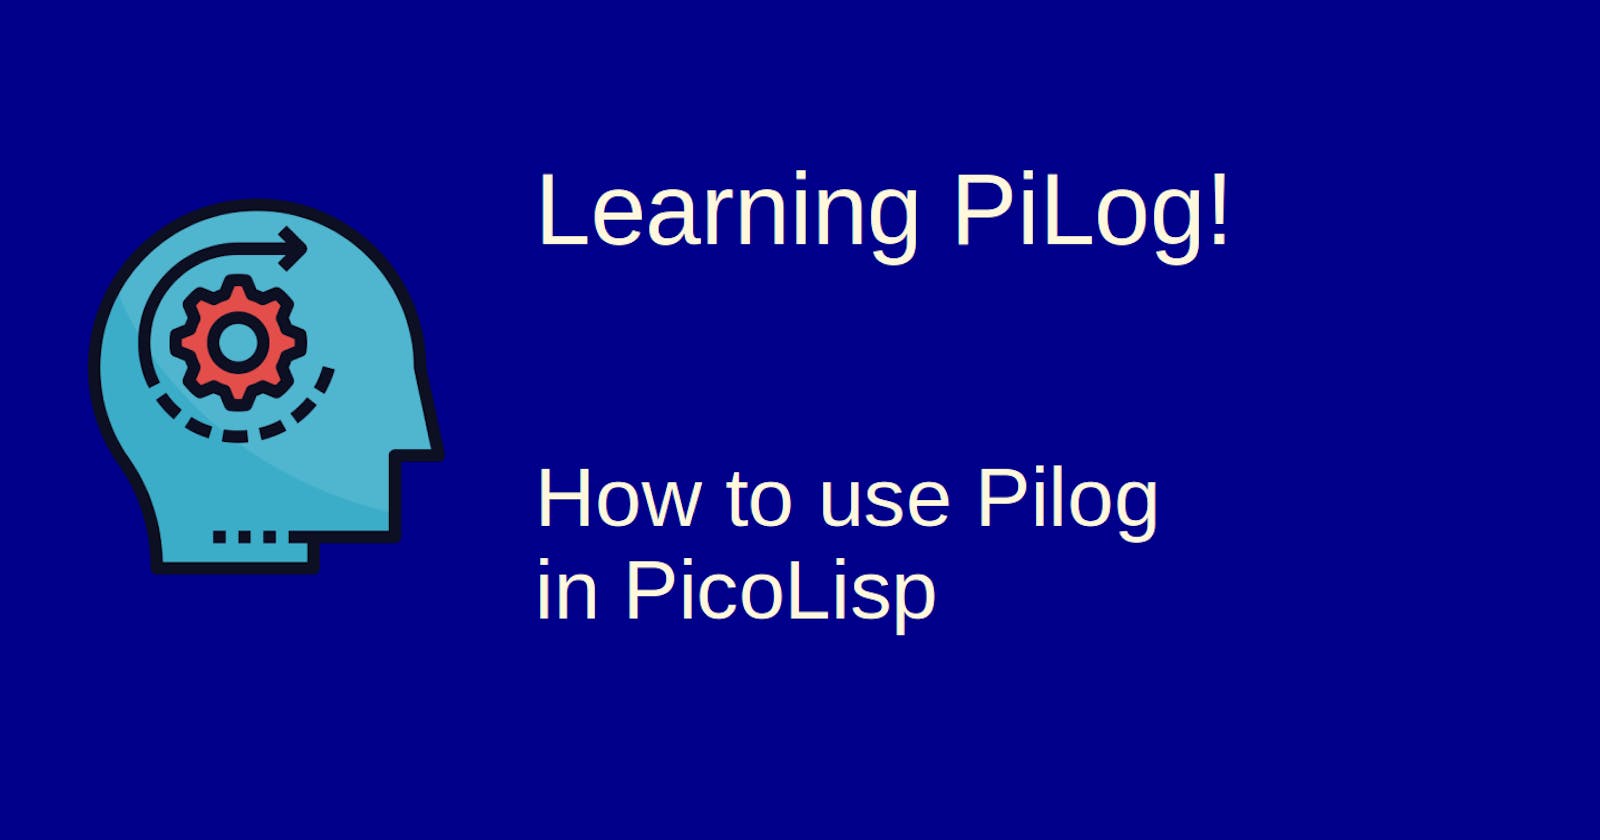 How to use Pilog in PicoLisp